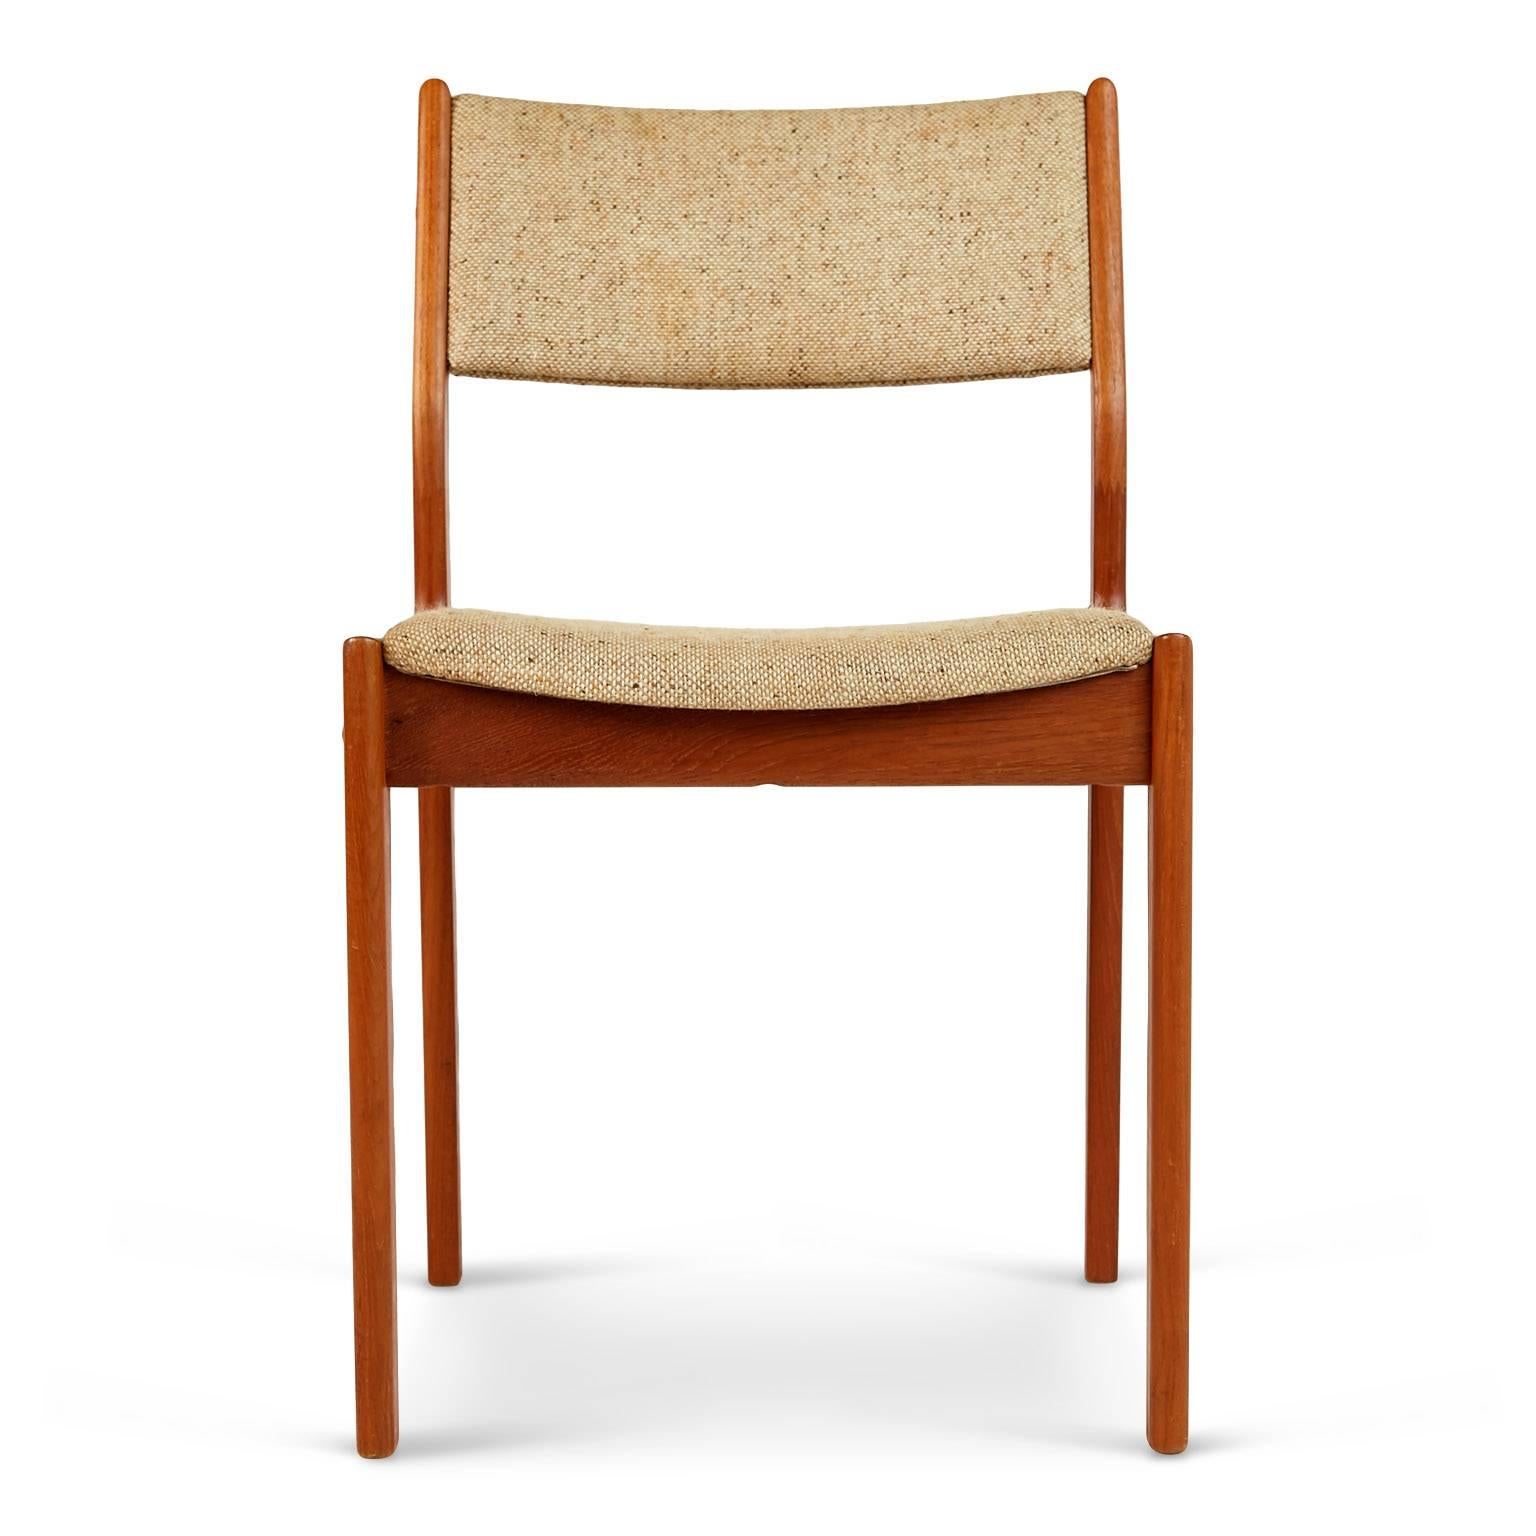 Set of four Danish Modern chairs comprised of warm wood grained teak upholstered in the original woven fabric which is a blend of cream, sand, taupe and ochre. 

This versatile set would be great used together or individually around the house in a